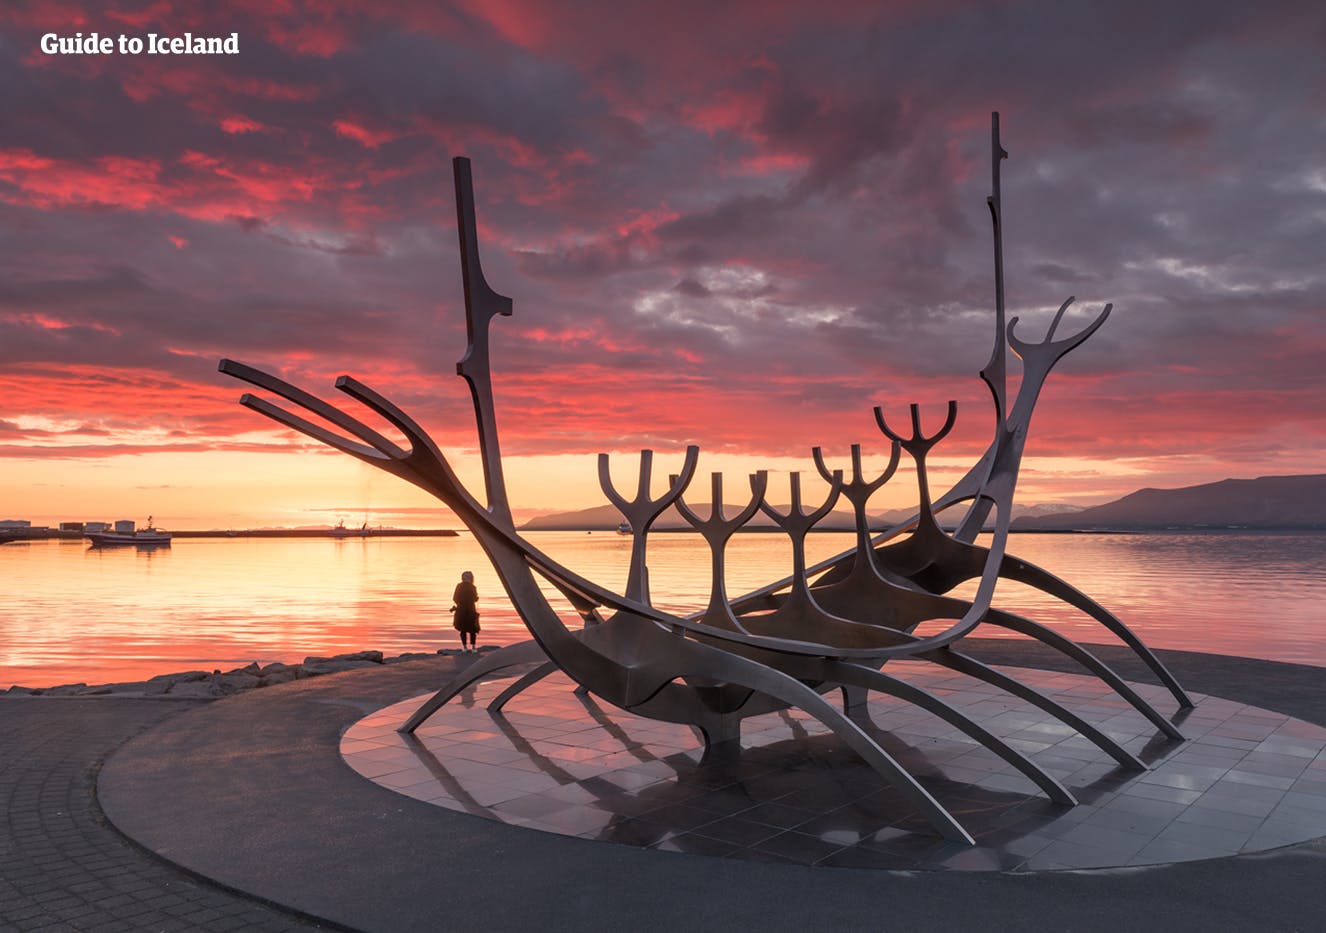 Reykjavík is brimming with opportunities, from exciting nighttime bars to sophisticated museums and art galleries.